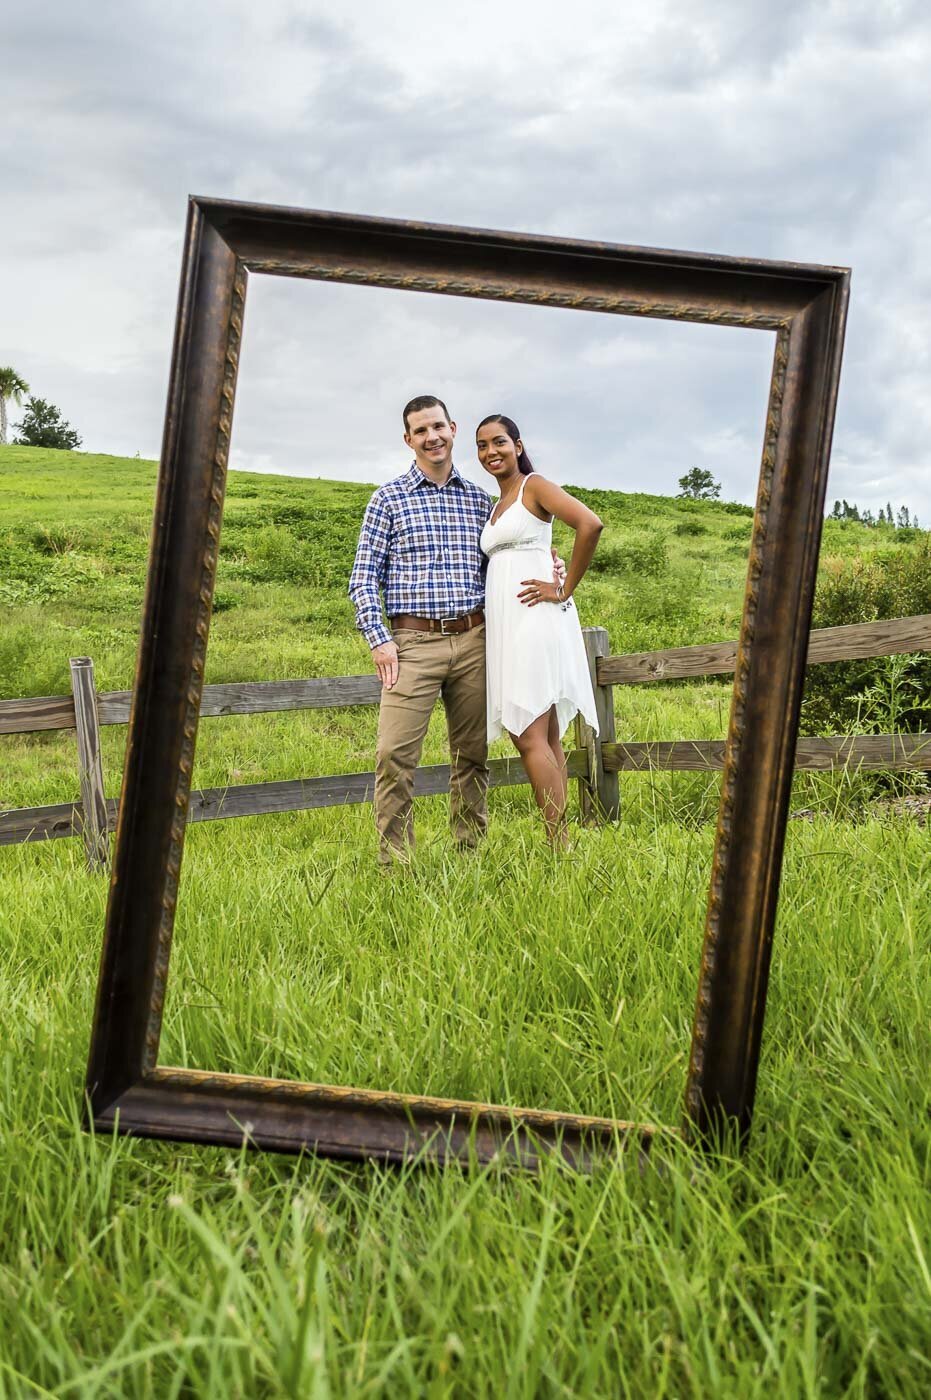 Engaged couple poses framed by a large wooden frame